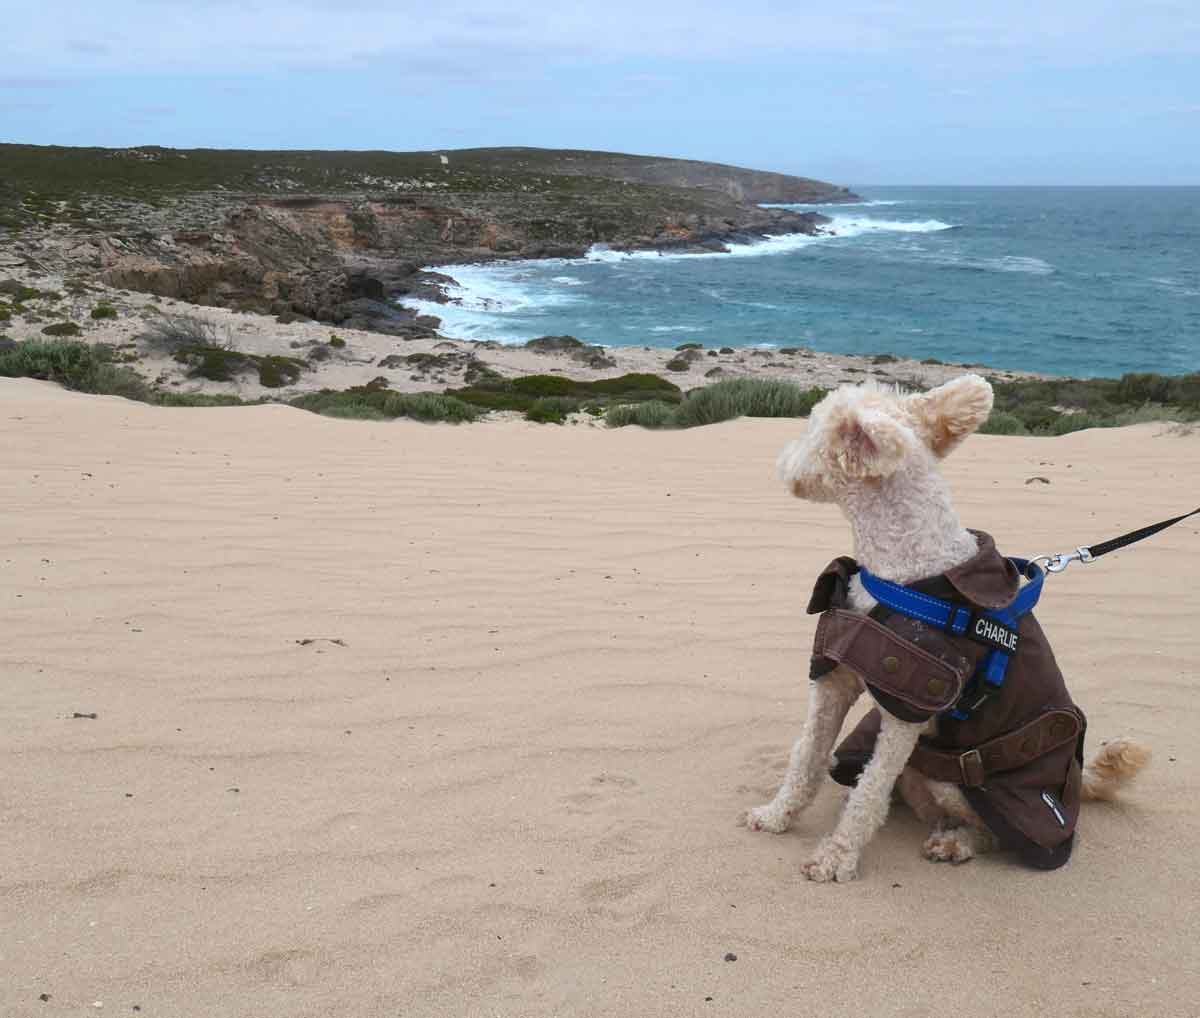 Charlie's ears pulled by the strong wind at Red Banks, he's looking out towards the coastline. Located in Whaler's Way Sanctuary, Eyre Peninsula, South Australia.